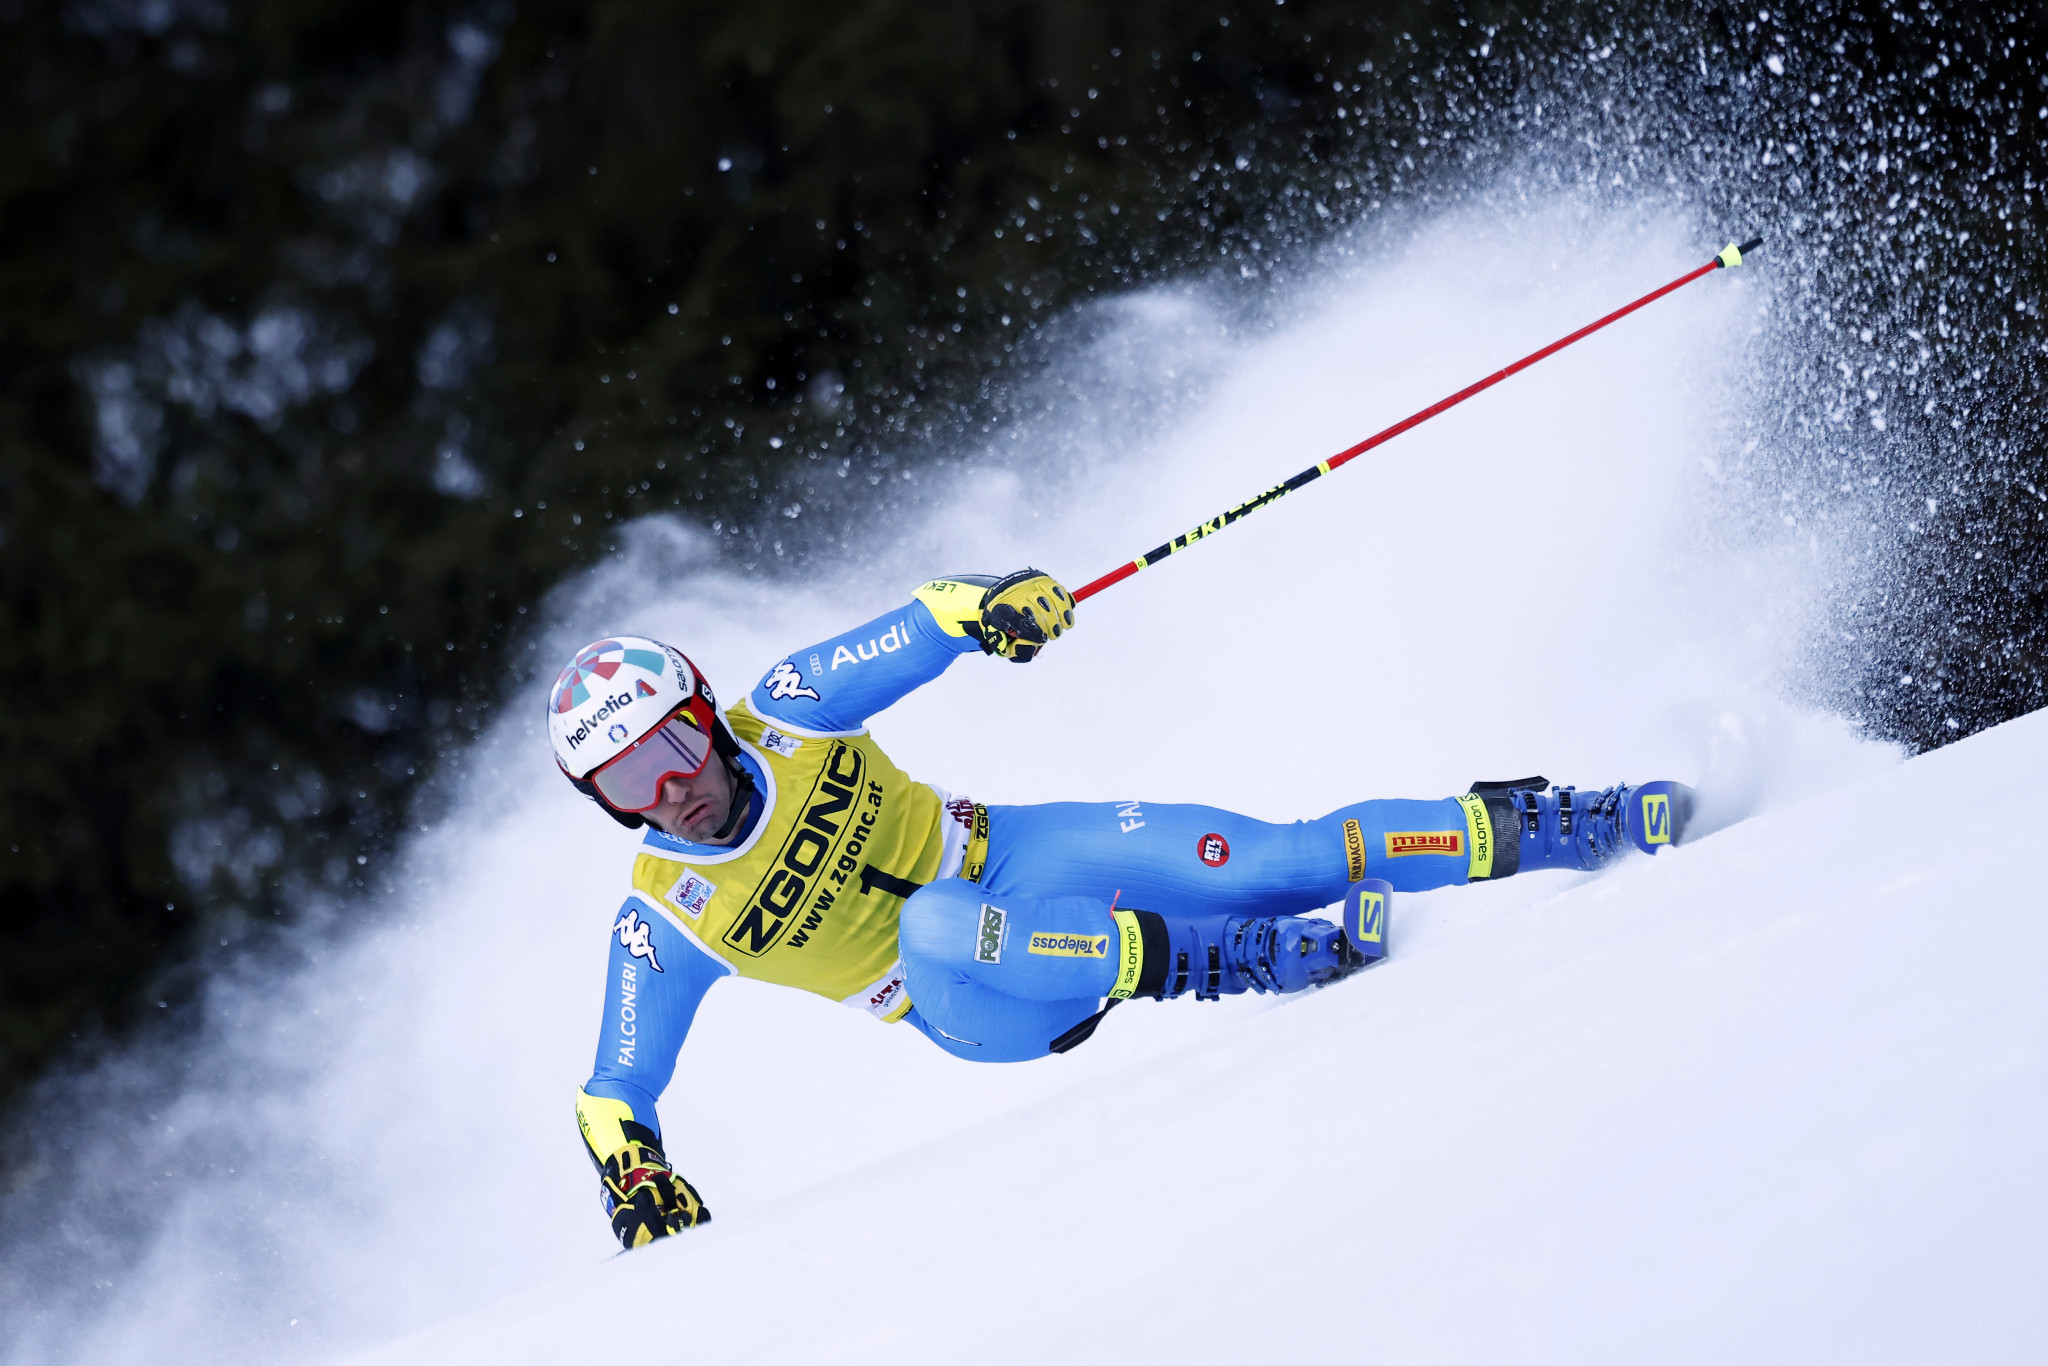 Luca De Aliprandini produced a best-ever World Cup result on home snow ©Getty Images